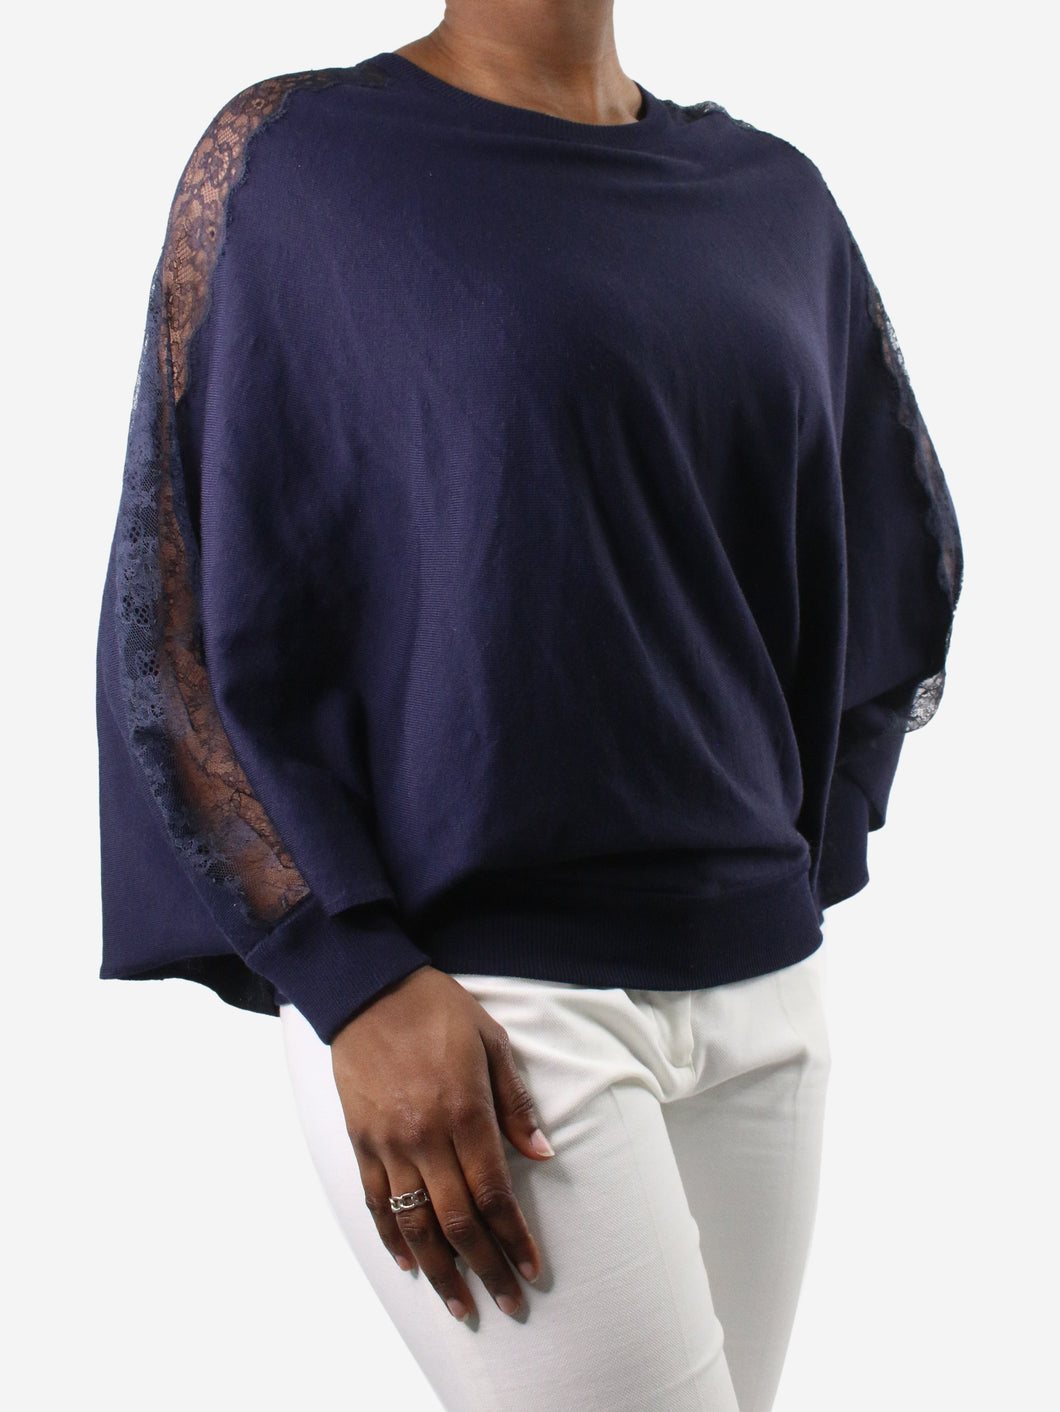 Navy Bat open sleeves jumper with lace details - size M Knitwear Valentino 